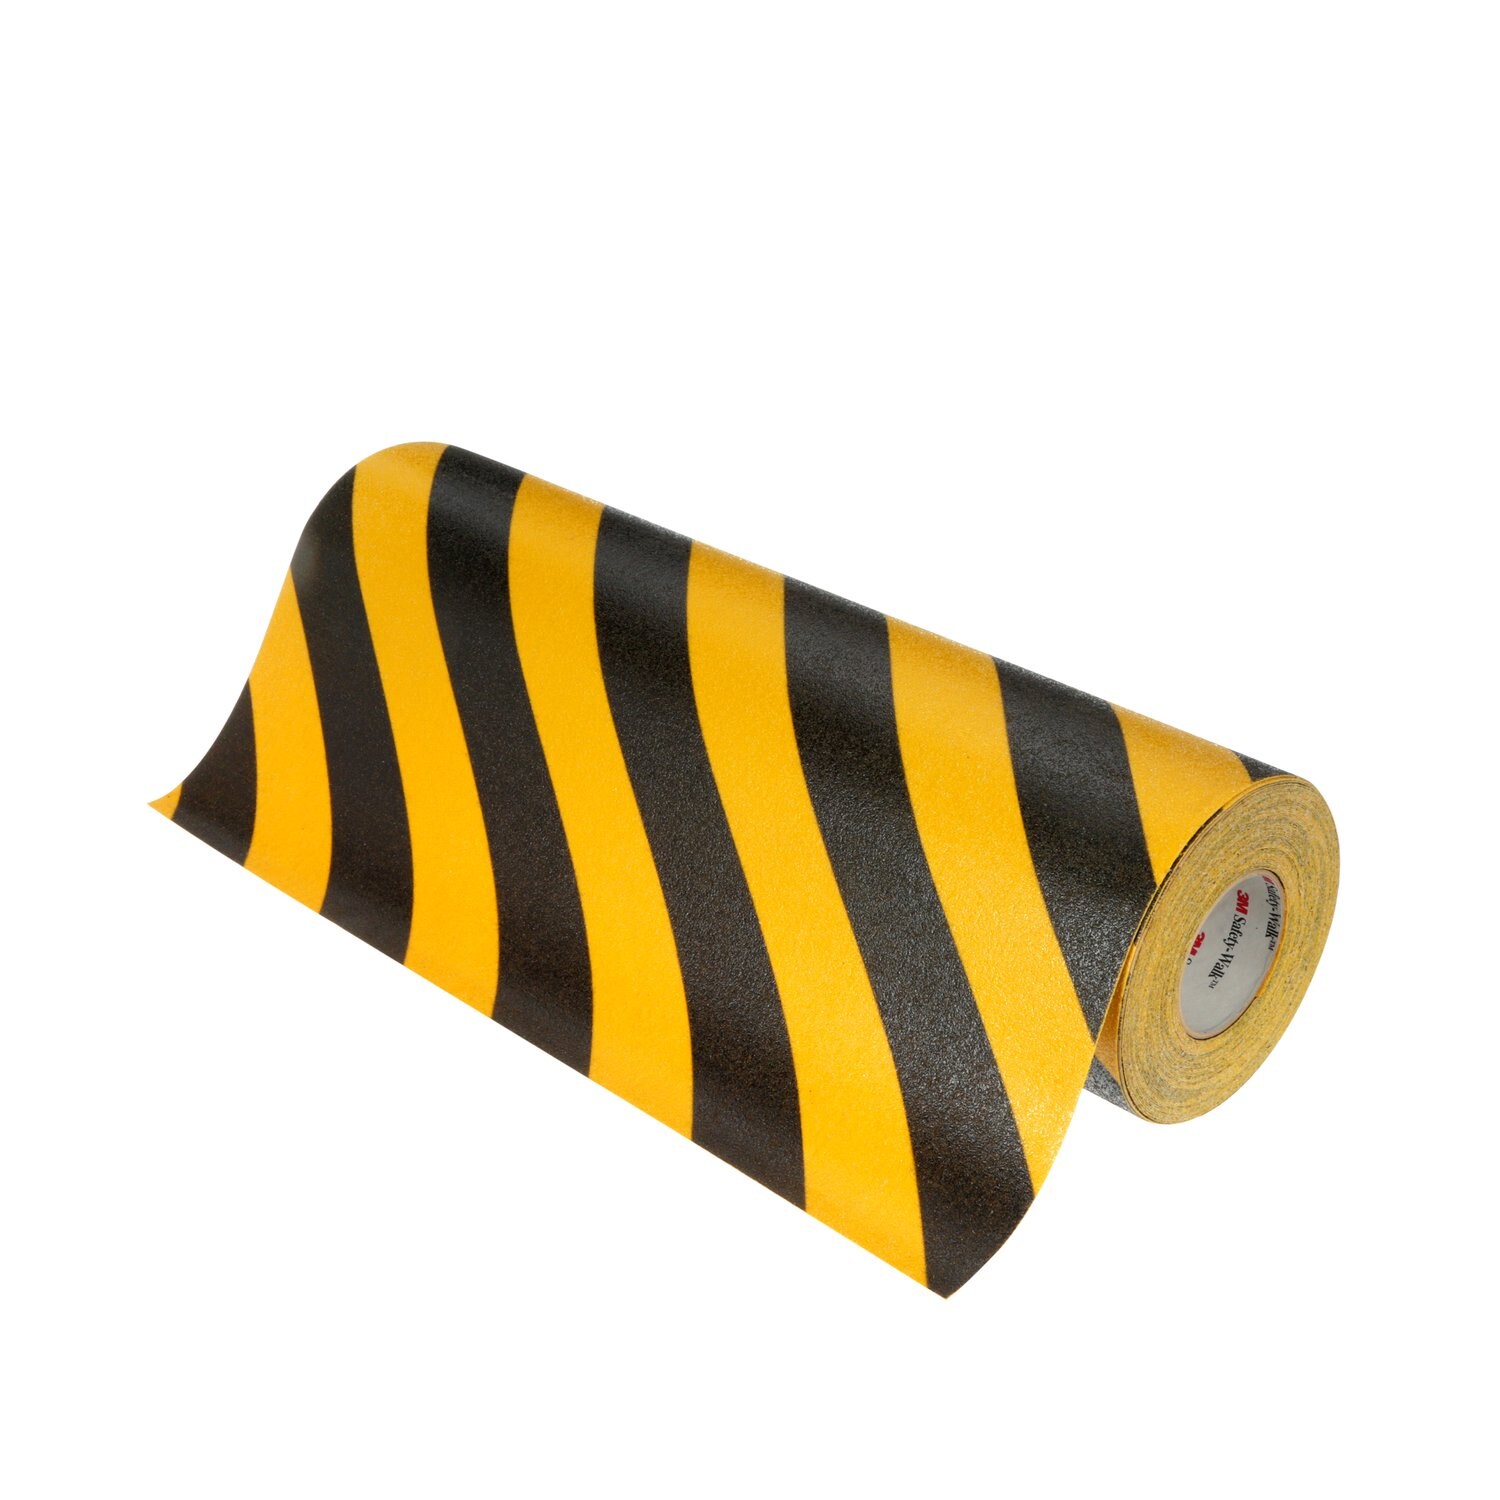 7010342276 - 3M Safety-Walk Slip-Resistant General Purpose Tapes & Treads 613,
Black/Yellow Stripe, 3 in x 60 ft, Roll, 1/Case